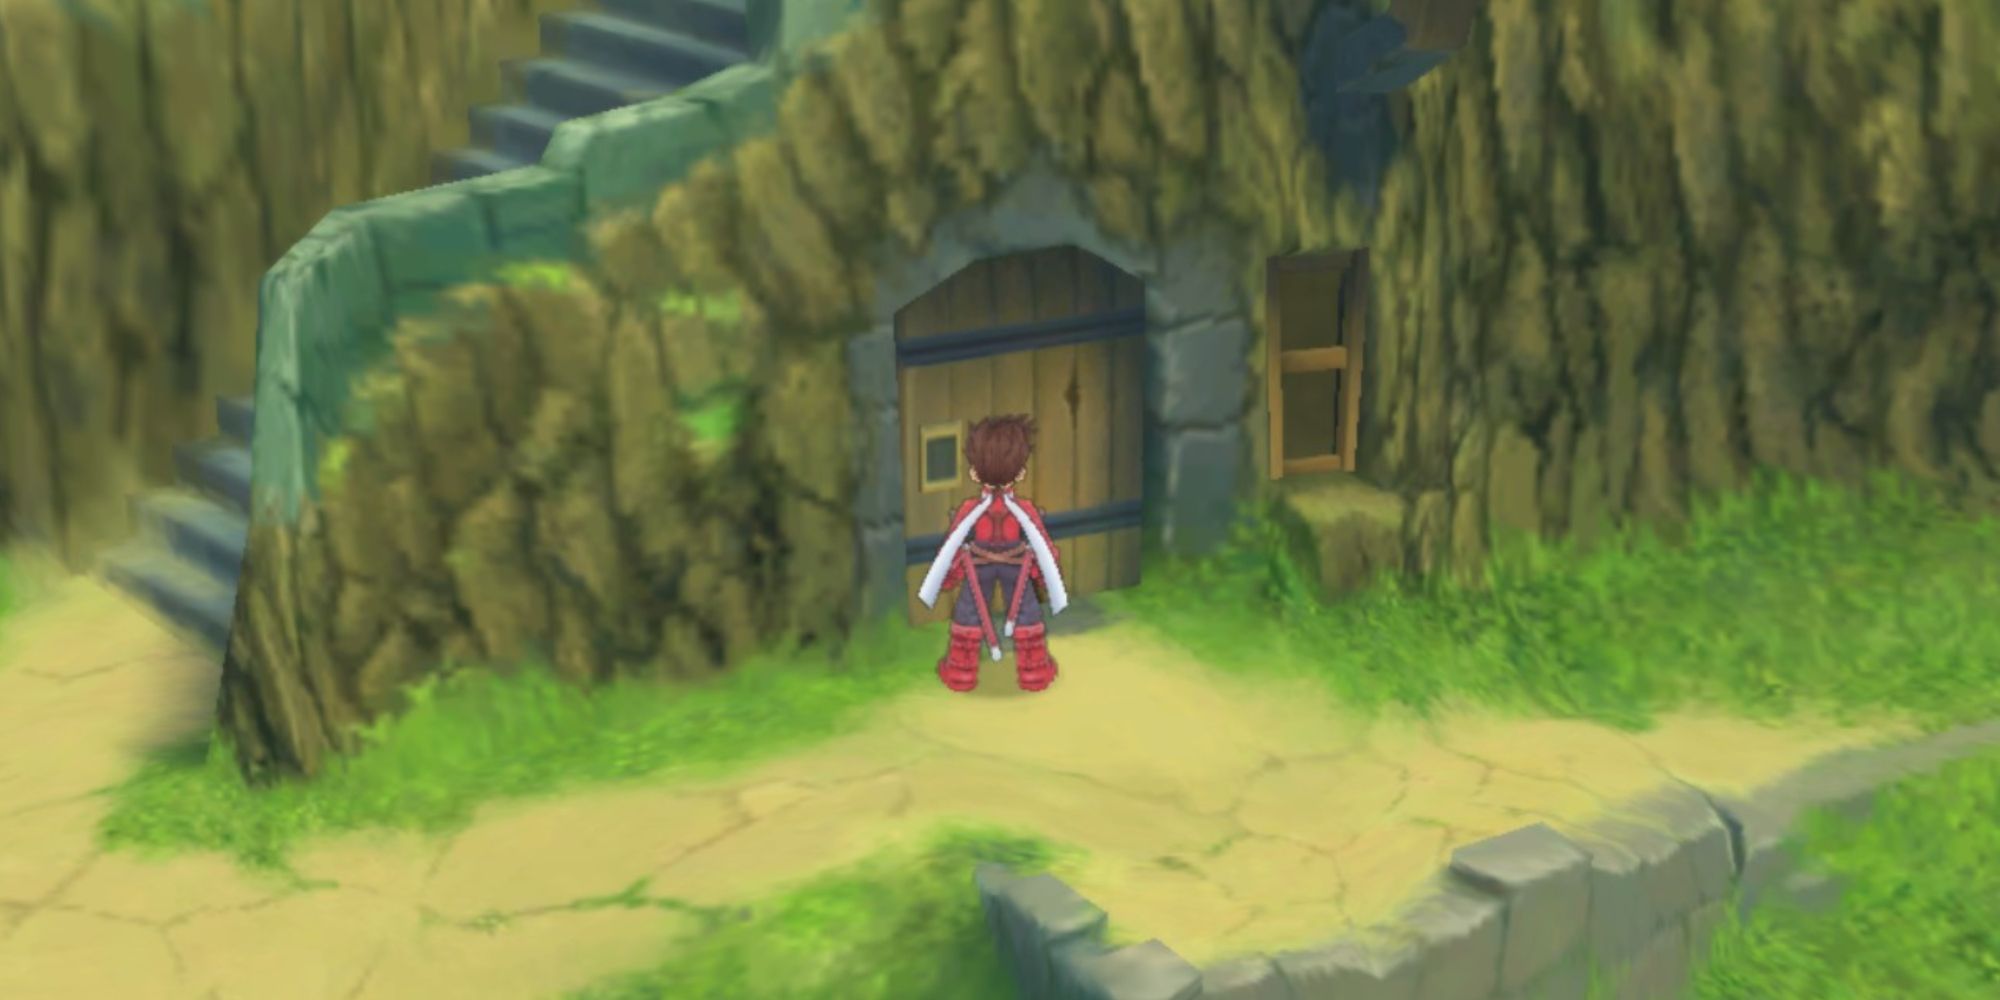 Lloyd approaching the door to Harley's House in Asgard, a city found in Tales of Symphonia Remastered